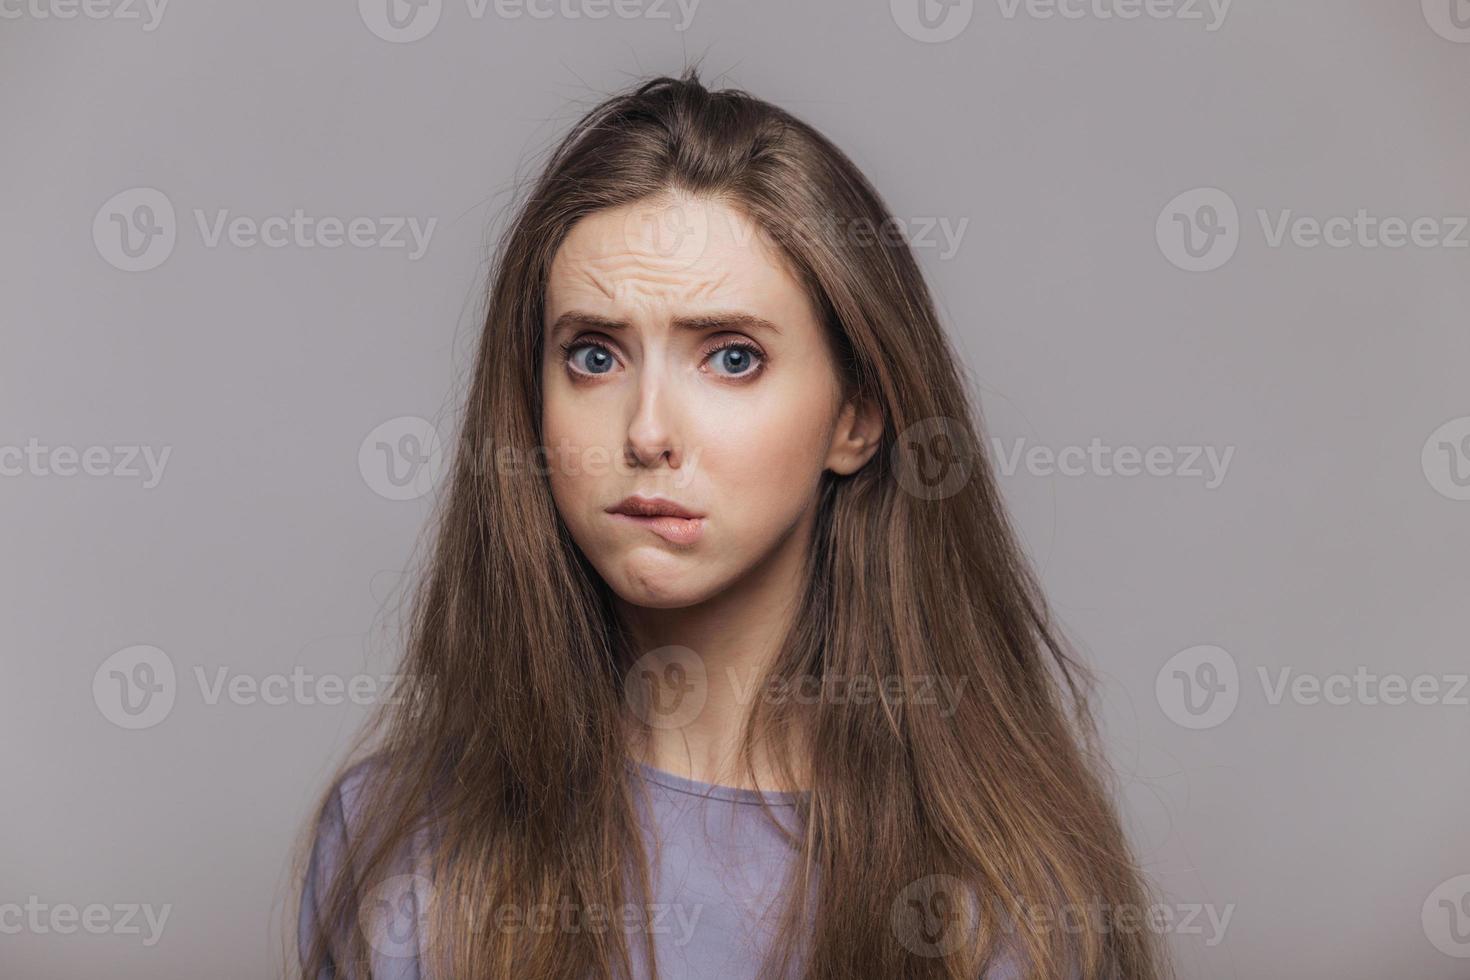 Offended stressful female bites lower lip with dissatisfaction, has sorrorful expression, expresses negative emotion, being in low spirit after quarrel with somebody, isolated over grey background photo